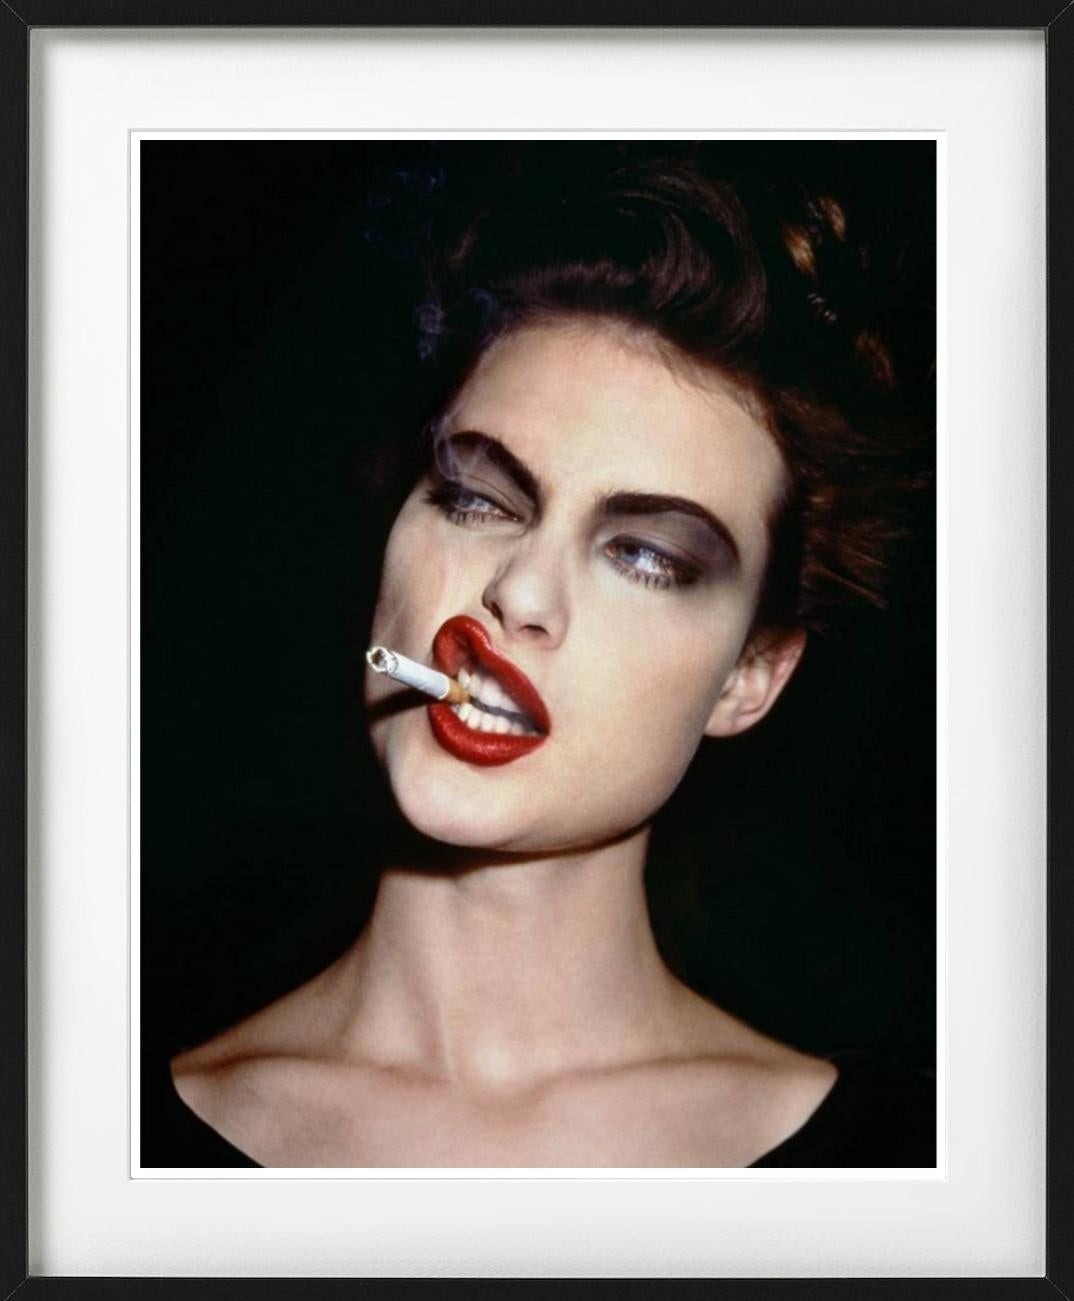 Shalom Harlow - portrait of the model smoking, fine art photography, 1995 - Contemporary Photograph by Roxanne Lowit